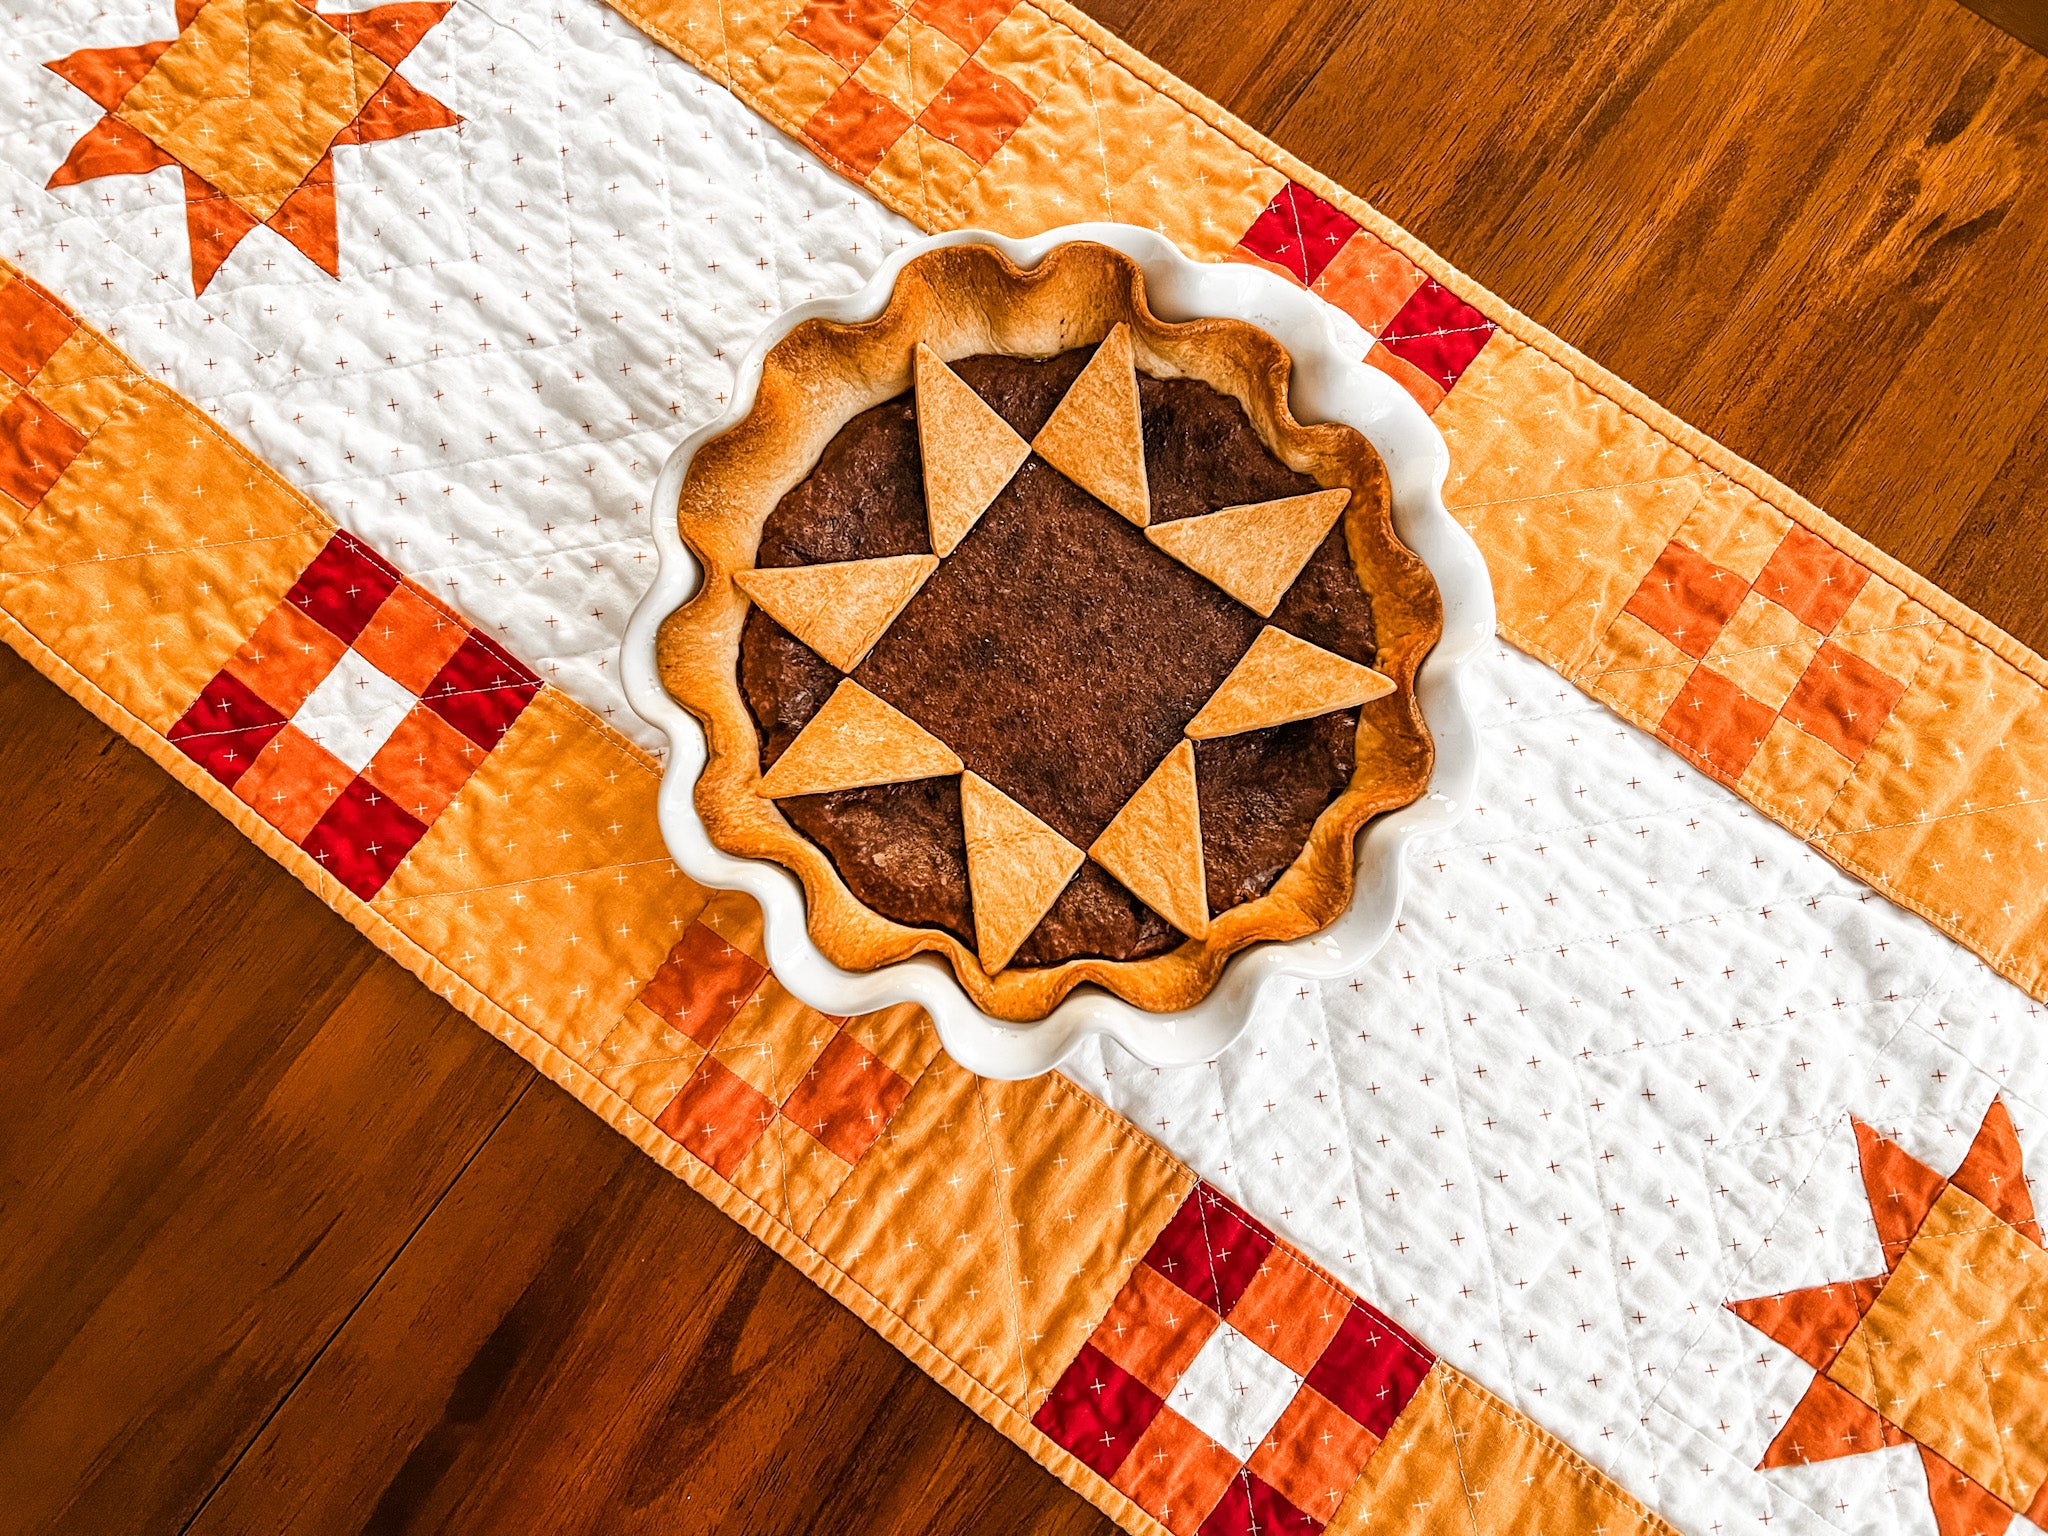 quilted pie on top of pockets full of blessings quilted table runner. thanksgiving table decor.